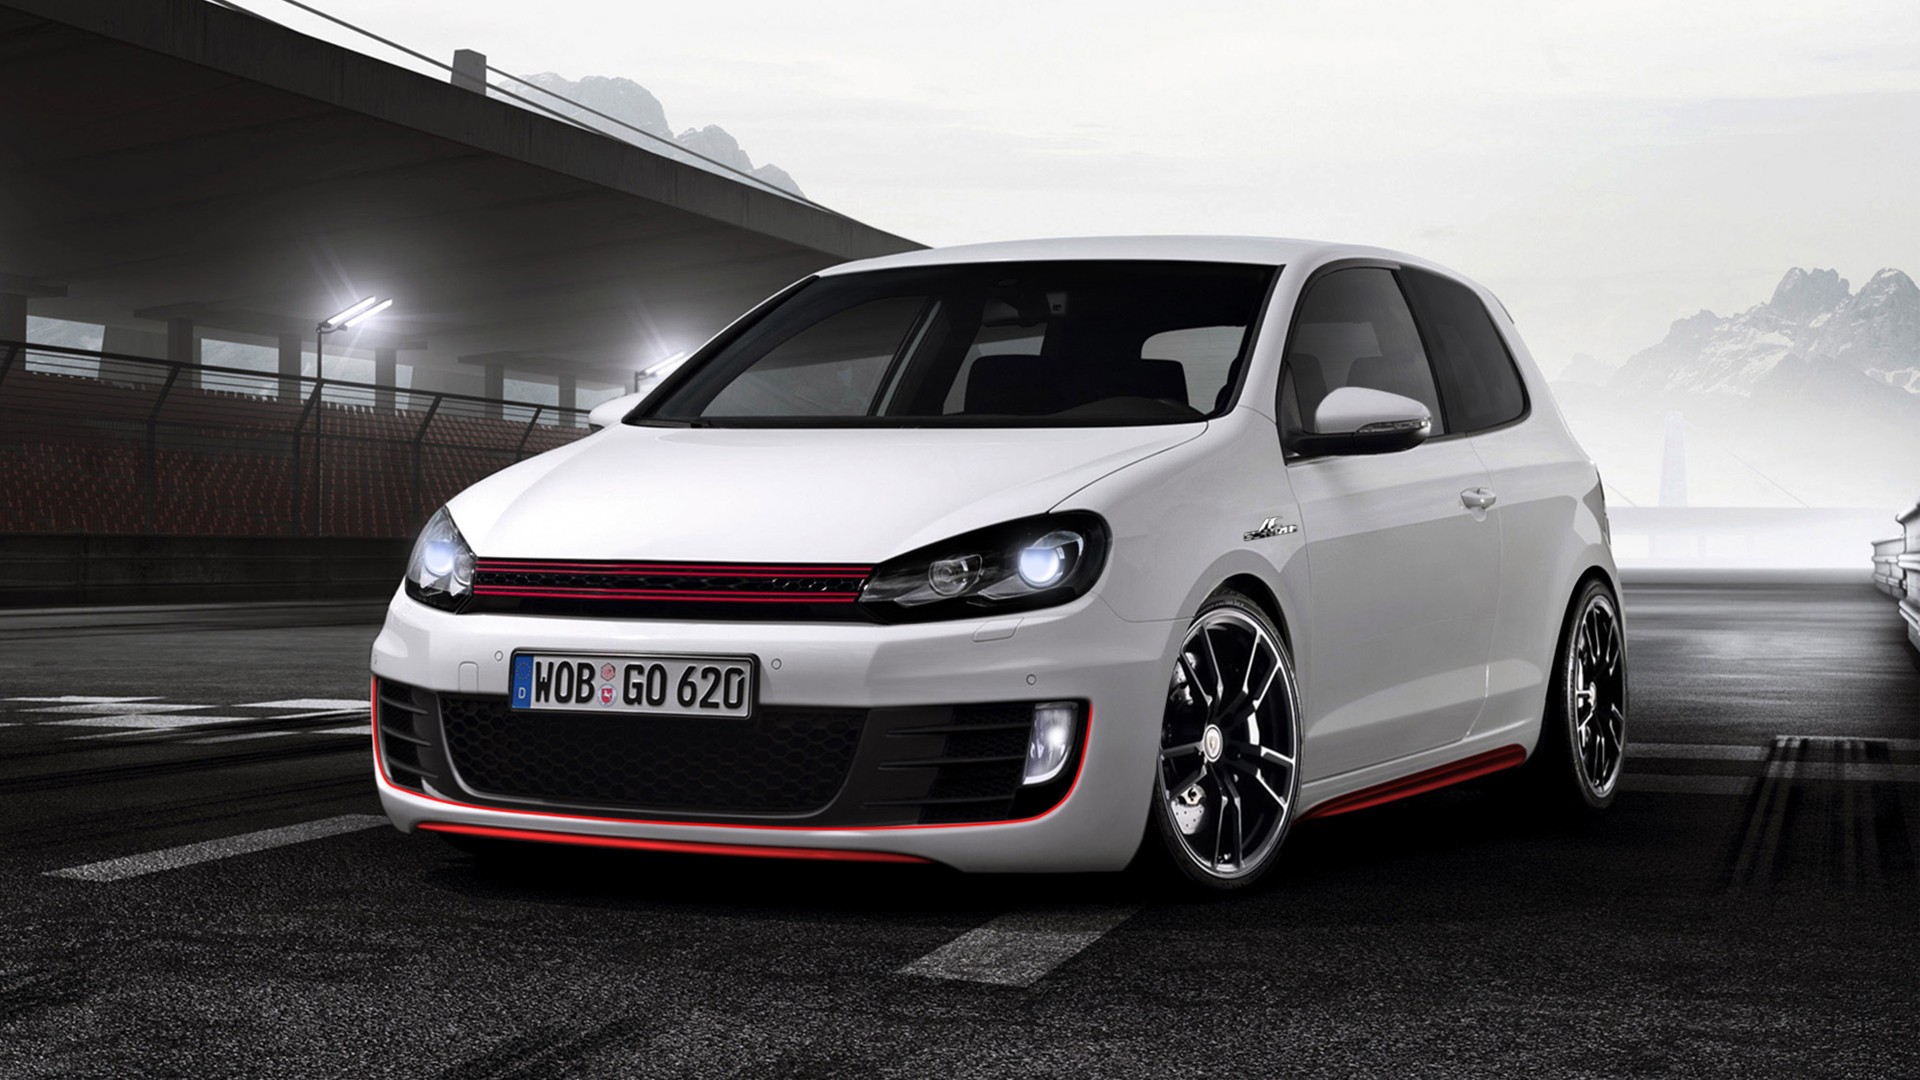 Wallpapers Vw Golf 7 Gti 2012 Pictures to pin 1920x1080